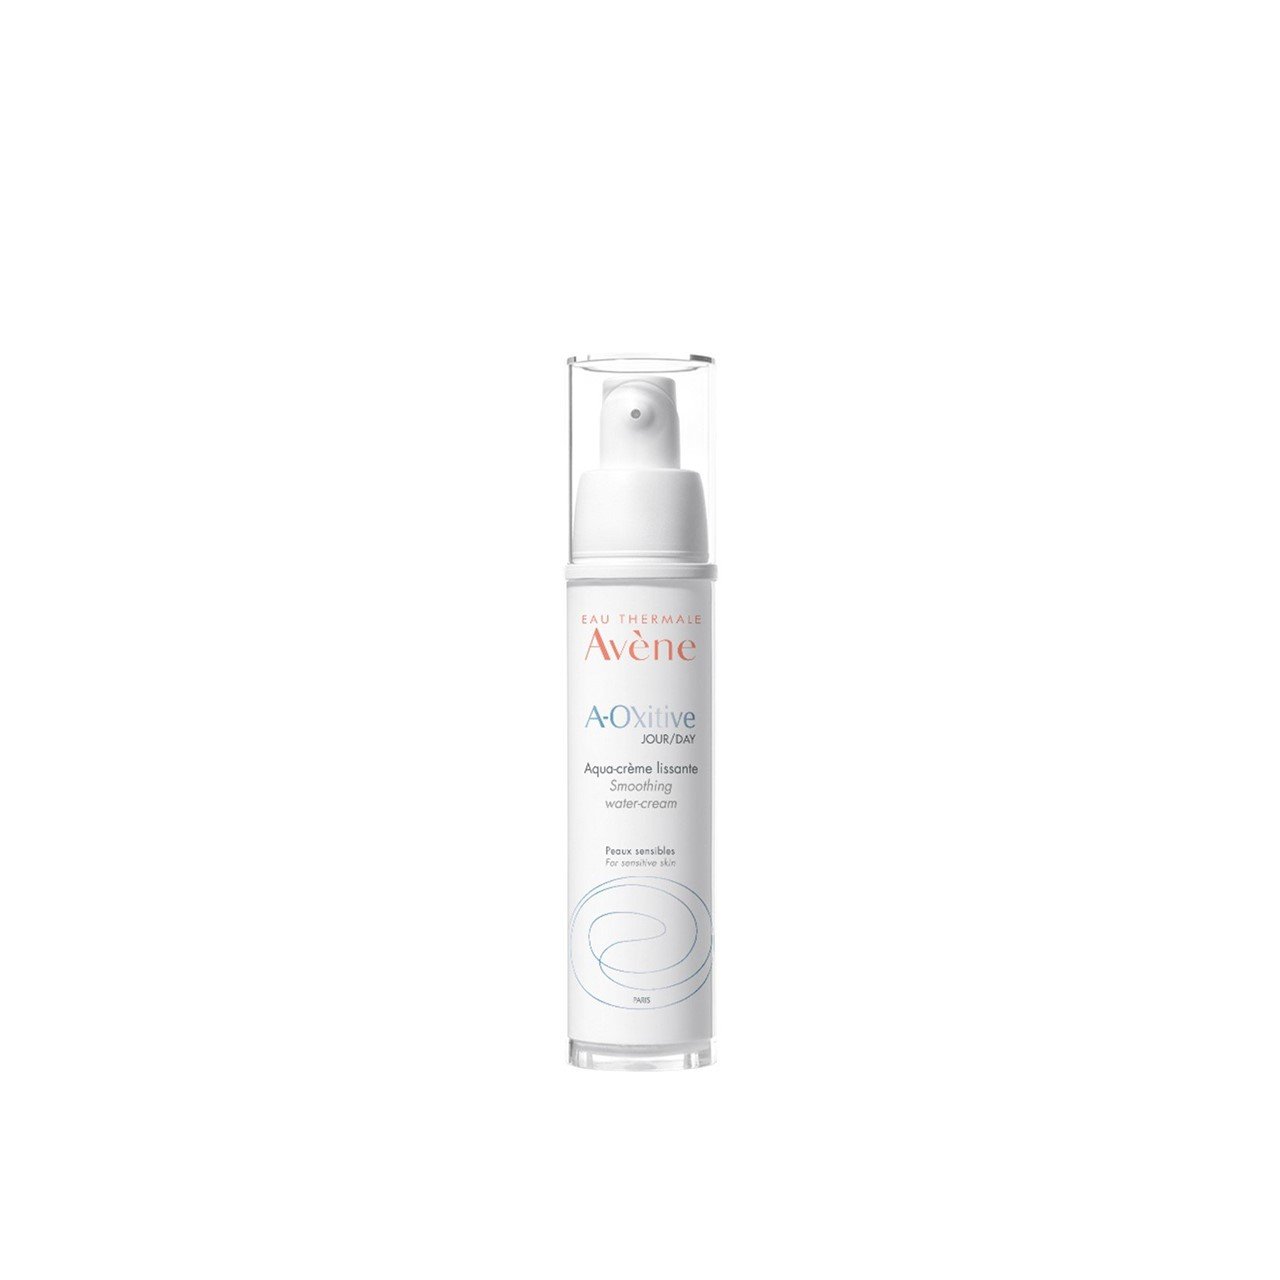 Avène A-Oxitive Smoothing Water-Cream 30ml (1.01floz)